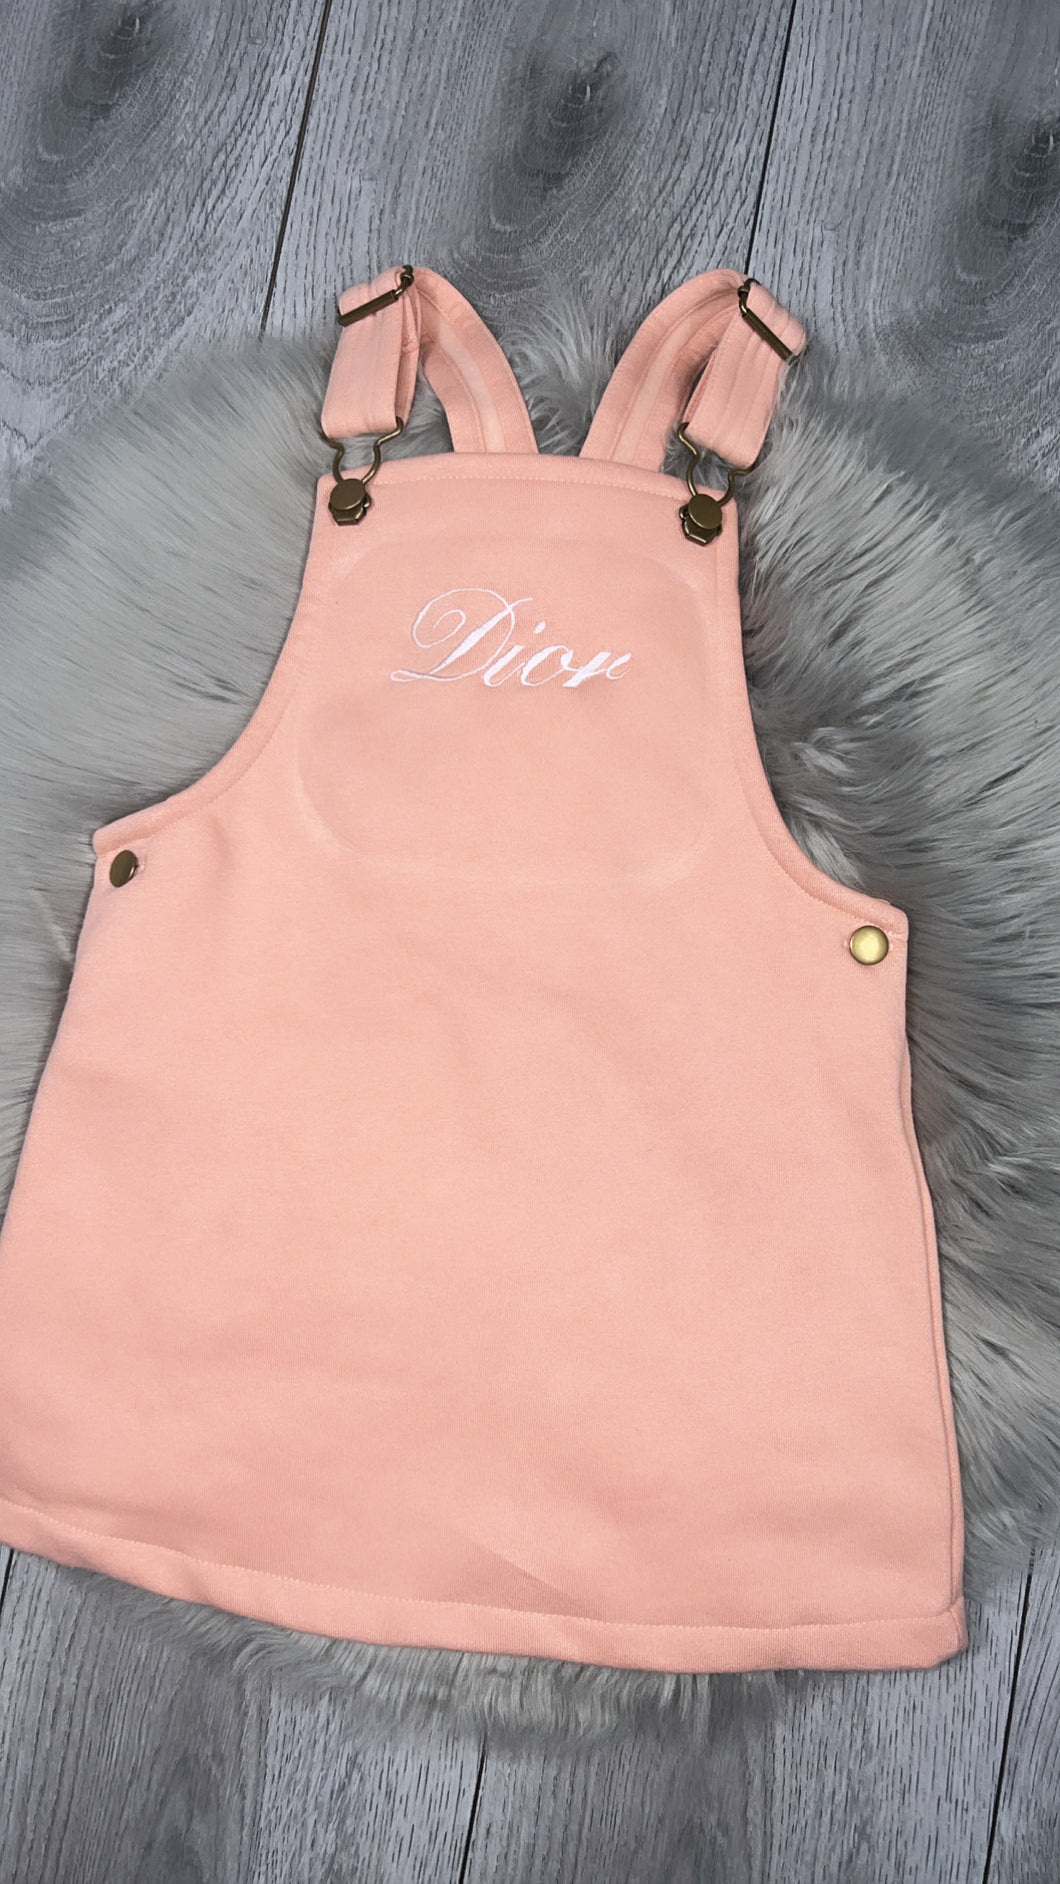 Perosnalised Children's Embroidered Dungaree Dress. Pink